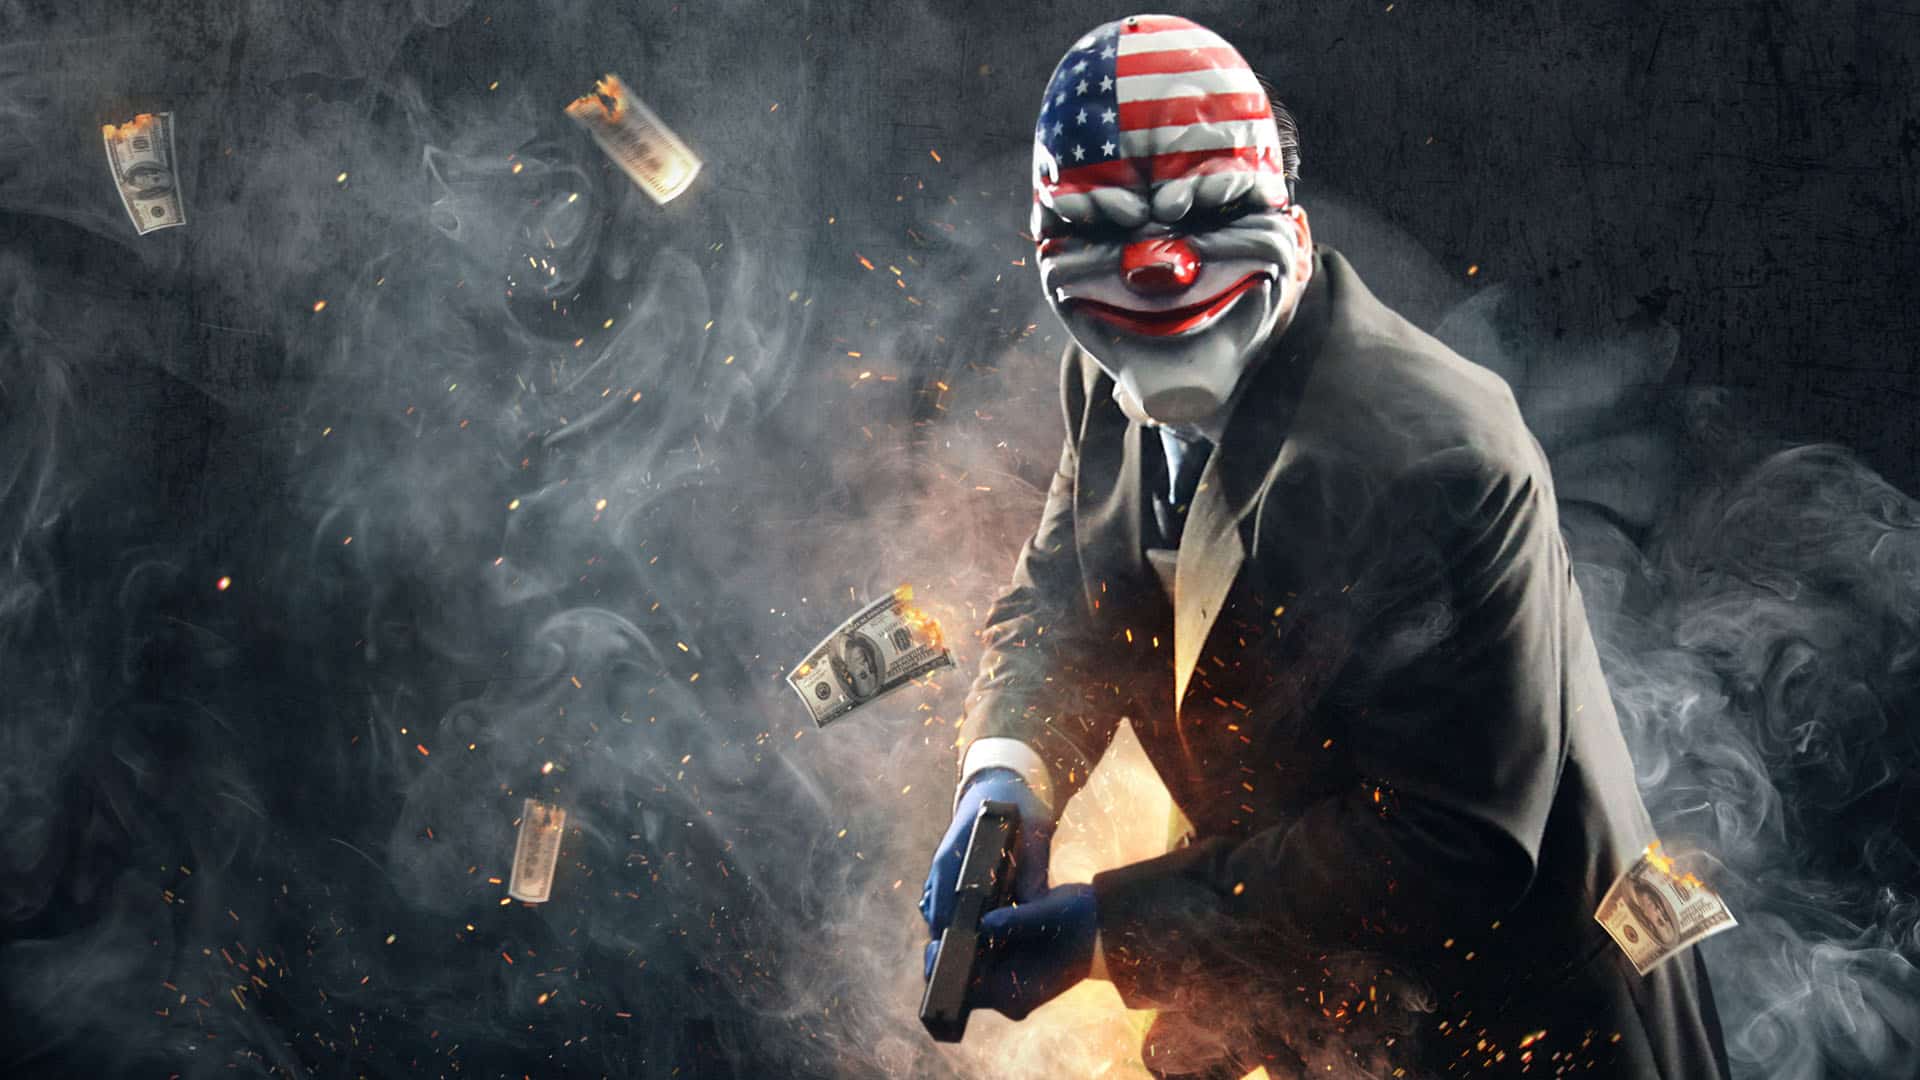 download payday vr for free